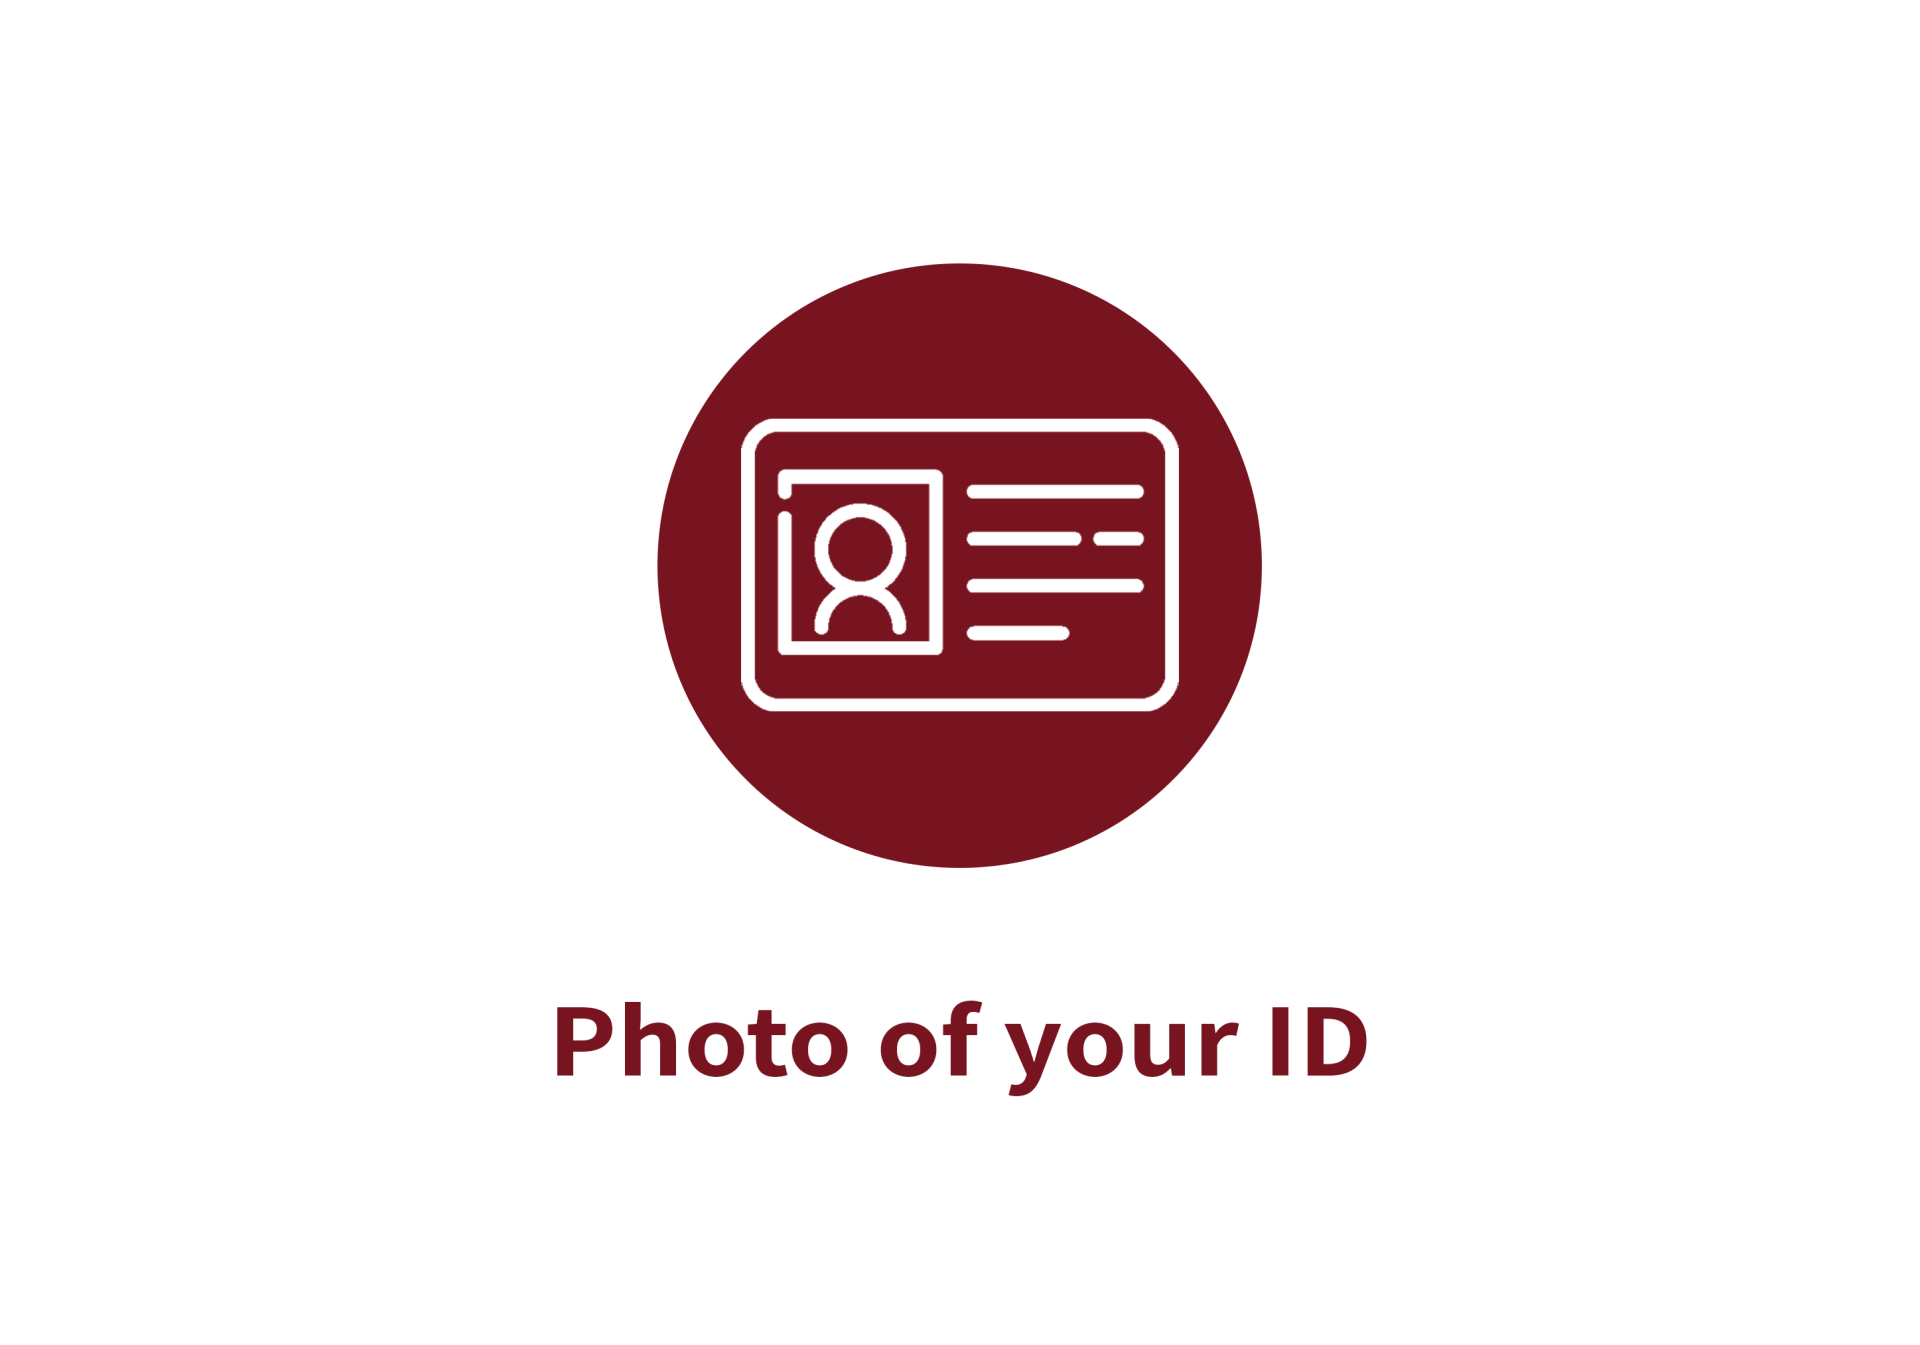 A picture of a id card in a red circle.